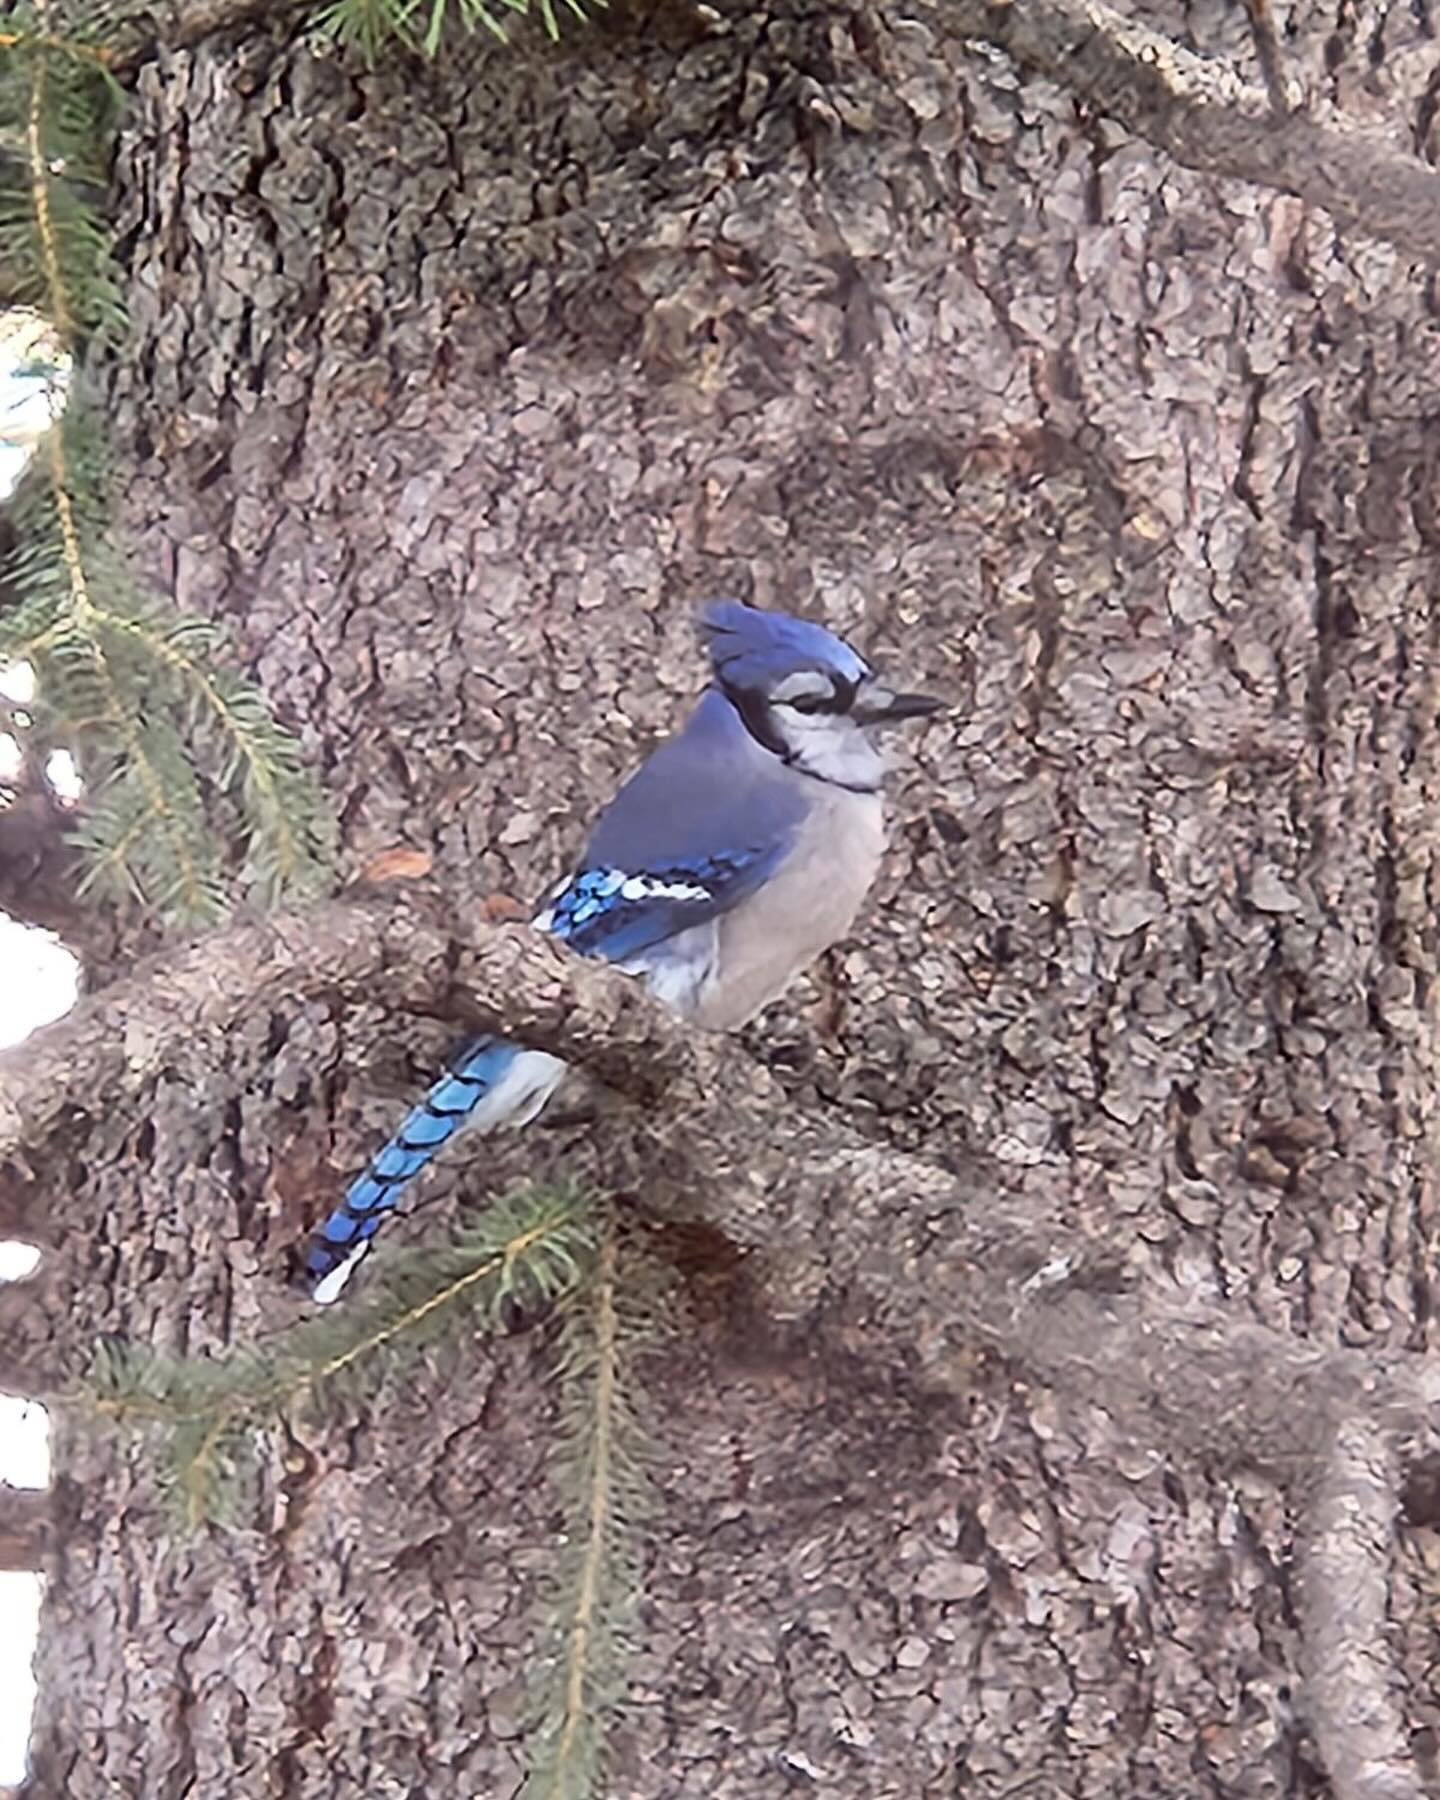 It was like he was posing for this photo! Out our front window in the big evergreen. It is spurring me on to the -design birds wagon! #jeannettedouglasdesigns #jeannettedouglas #bluejay #bluejaybird #ideas